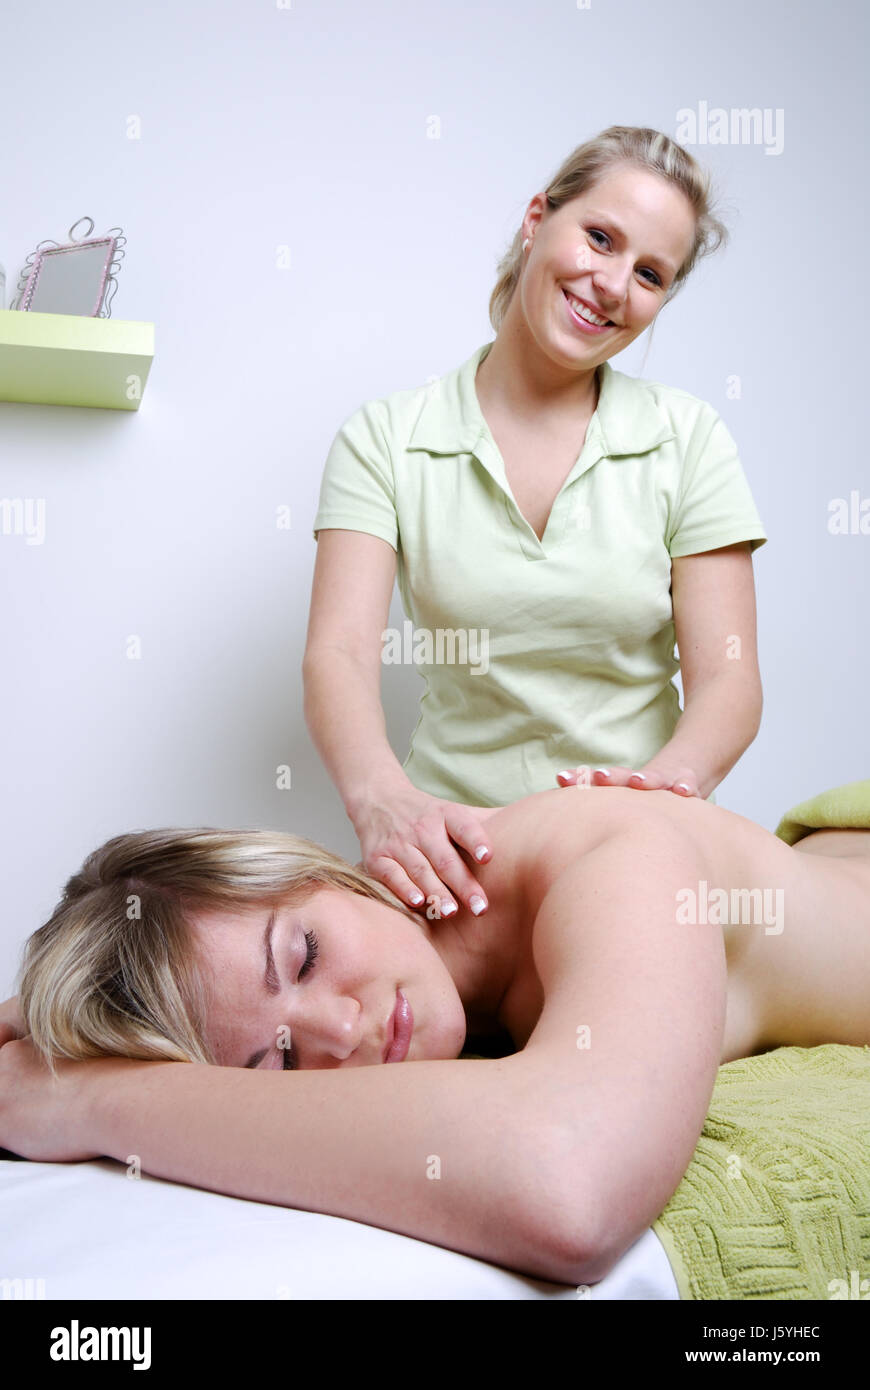 woman women relaxation wellness massage laugh laughs laughing twit giggle smile Stock Photo